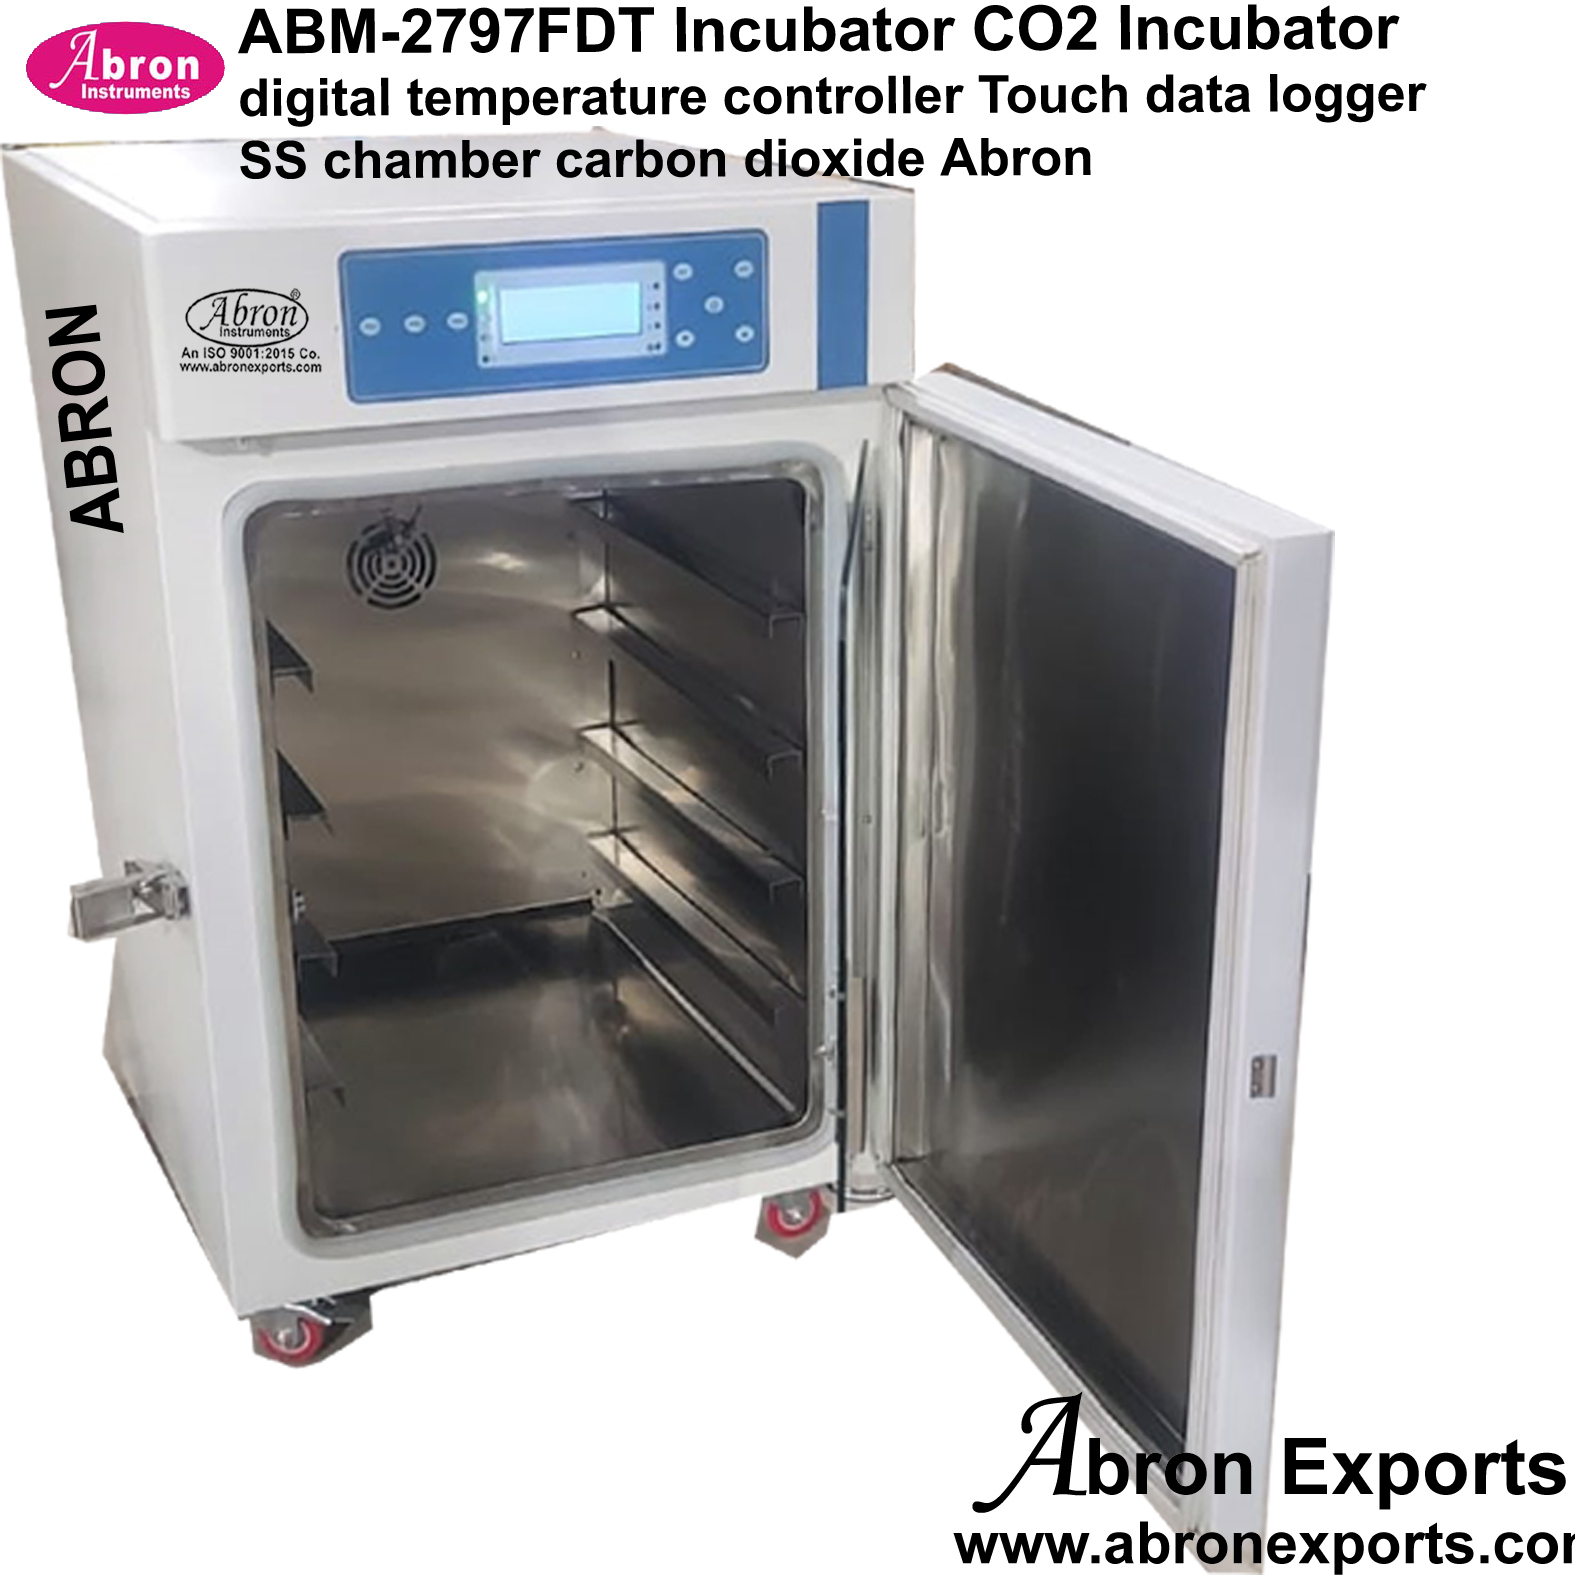 Incubator CO2 Incubator digital temperature controller Touch data logger SS chamber carbon dioxide Abron ABM-2797DT2 